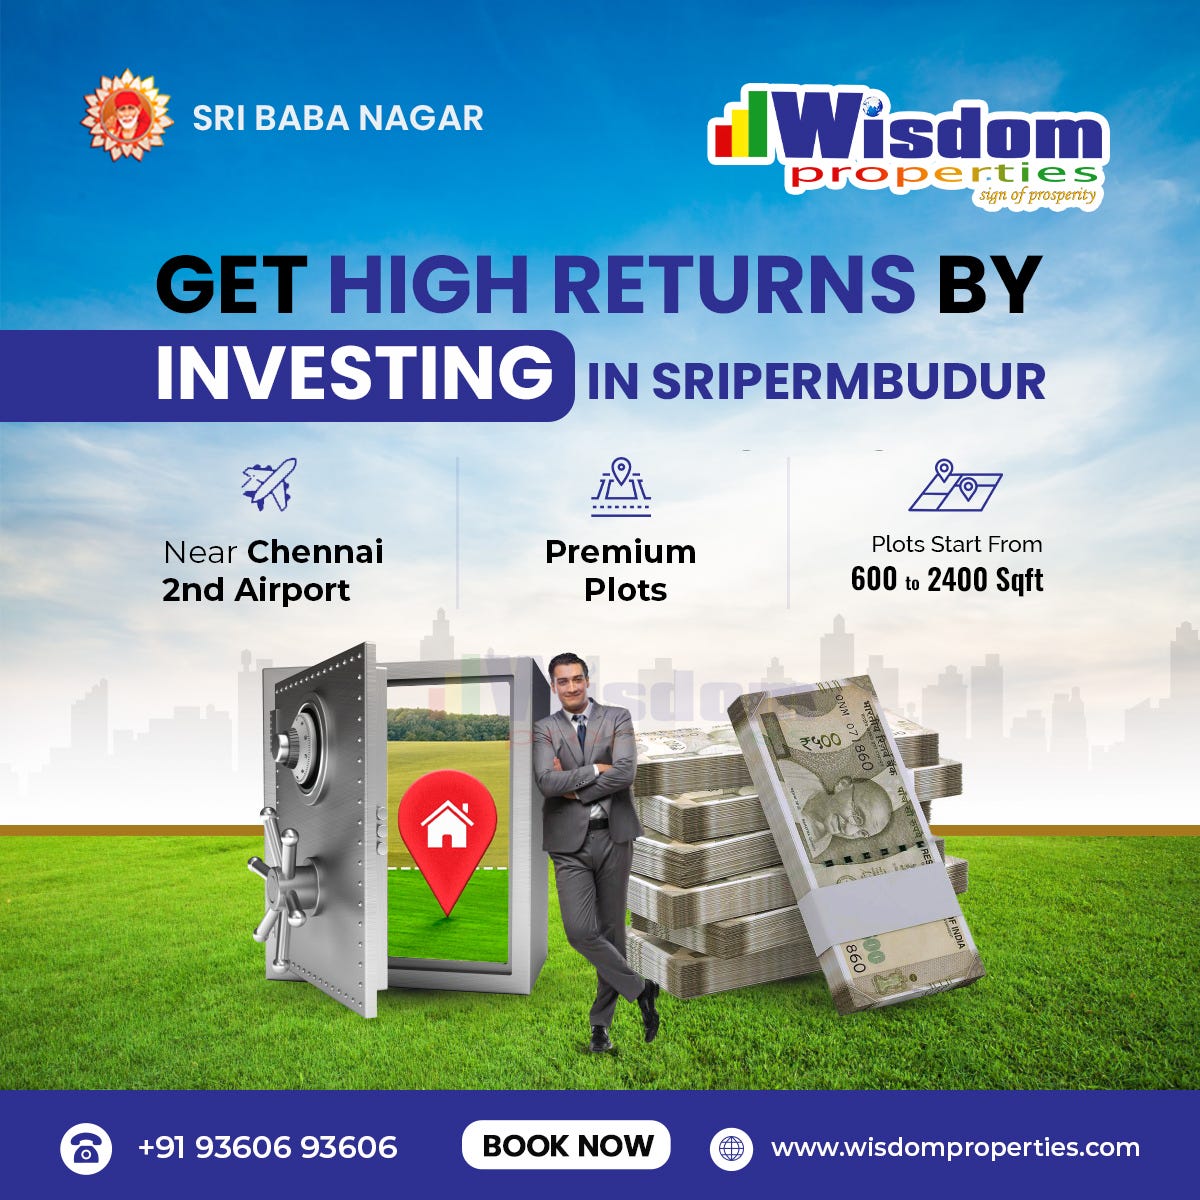 Get High Returns by Investing in Sriperumbudue